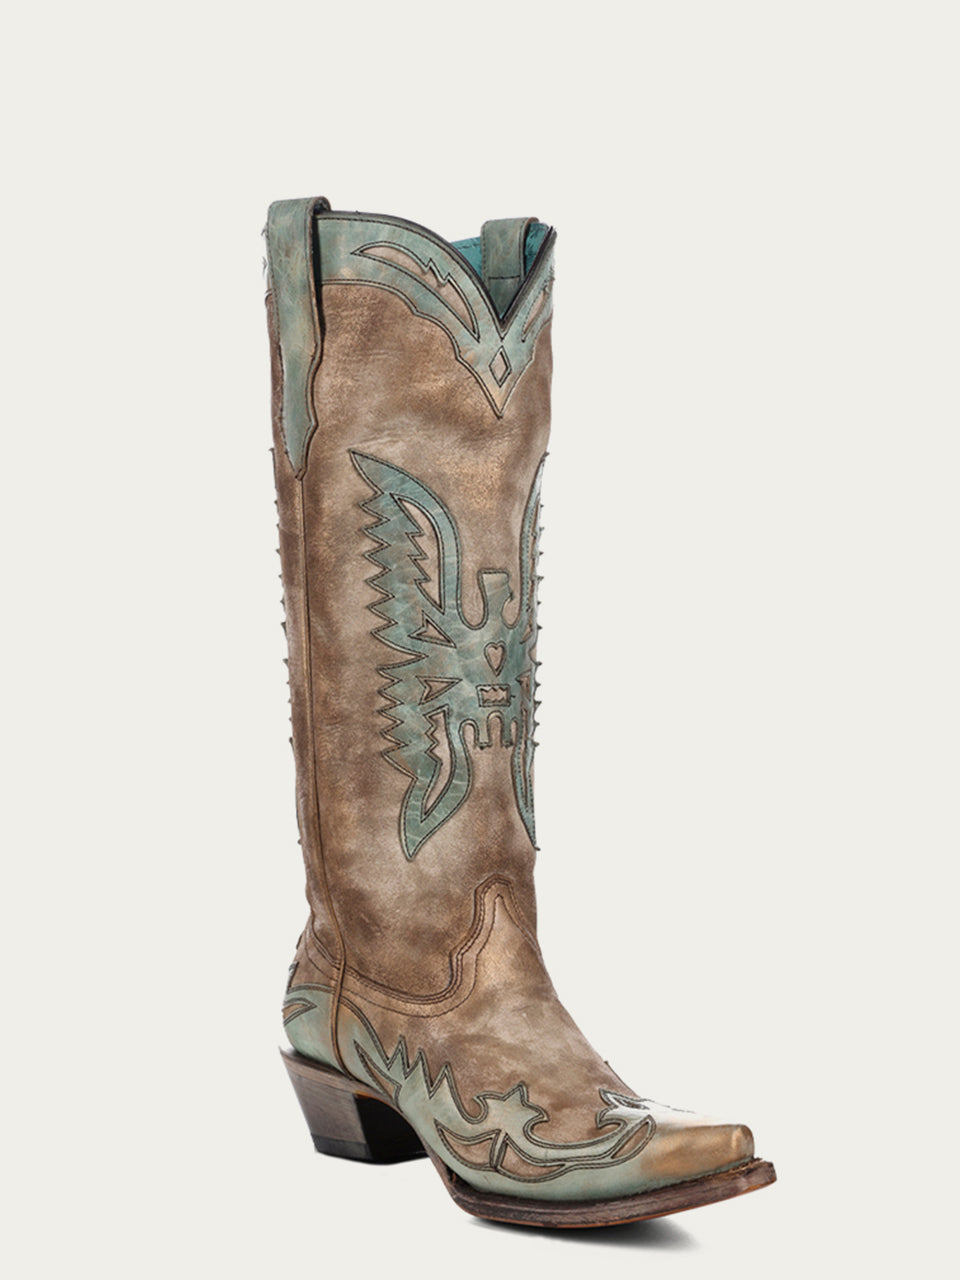 A4302 - WOMEN'S GOAT VINTAGE BONE AND TURQUOISE EAGLE OVERLAY SNIP-TOE COWBOY BOOT